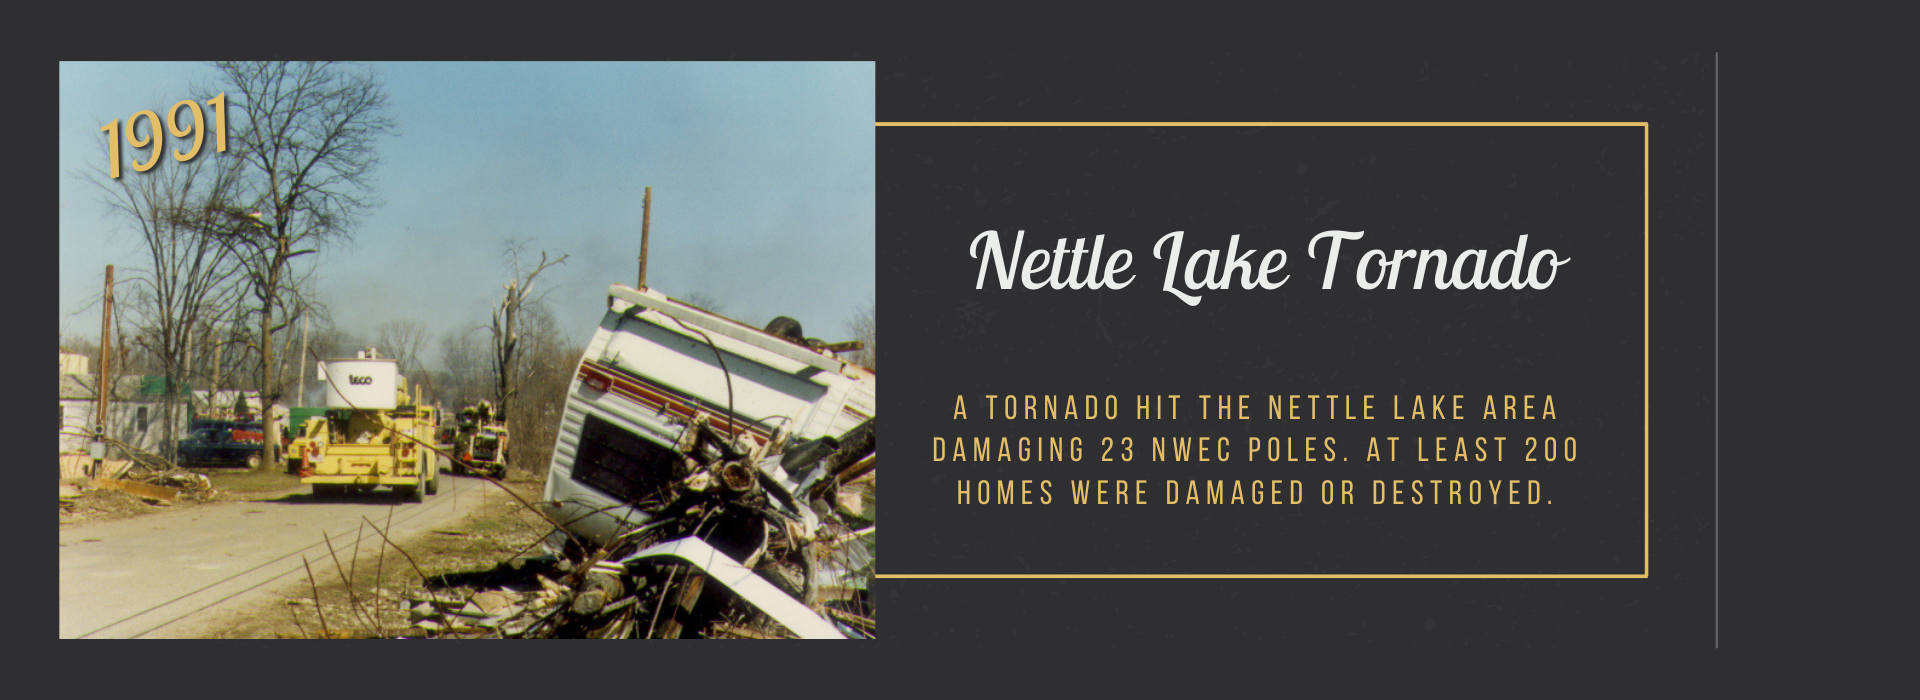 A tornado hit the Nettle Lake area damaging 23 NWEC poles. at least 200 homes were damaged or destroyed.